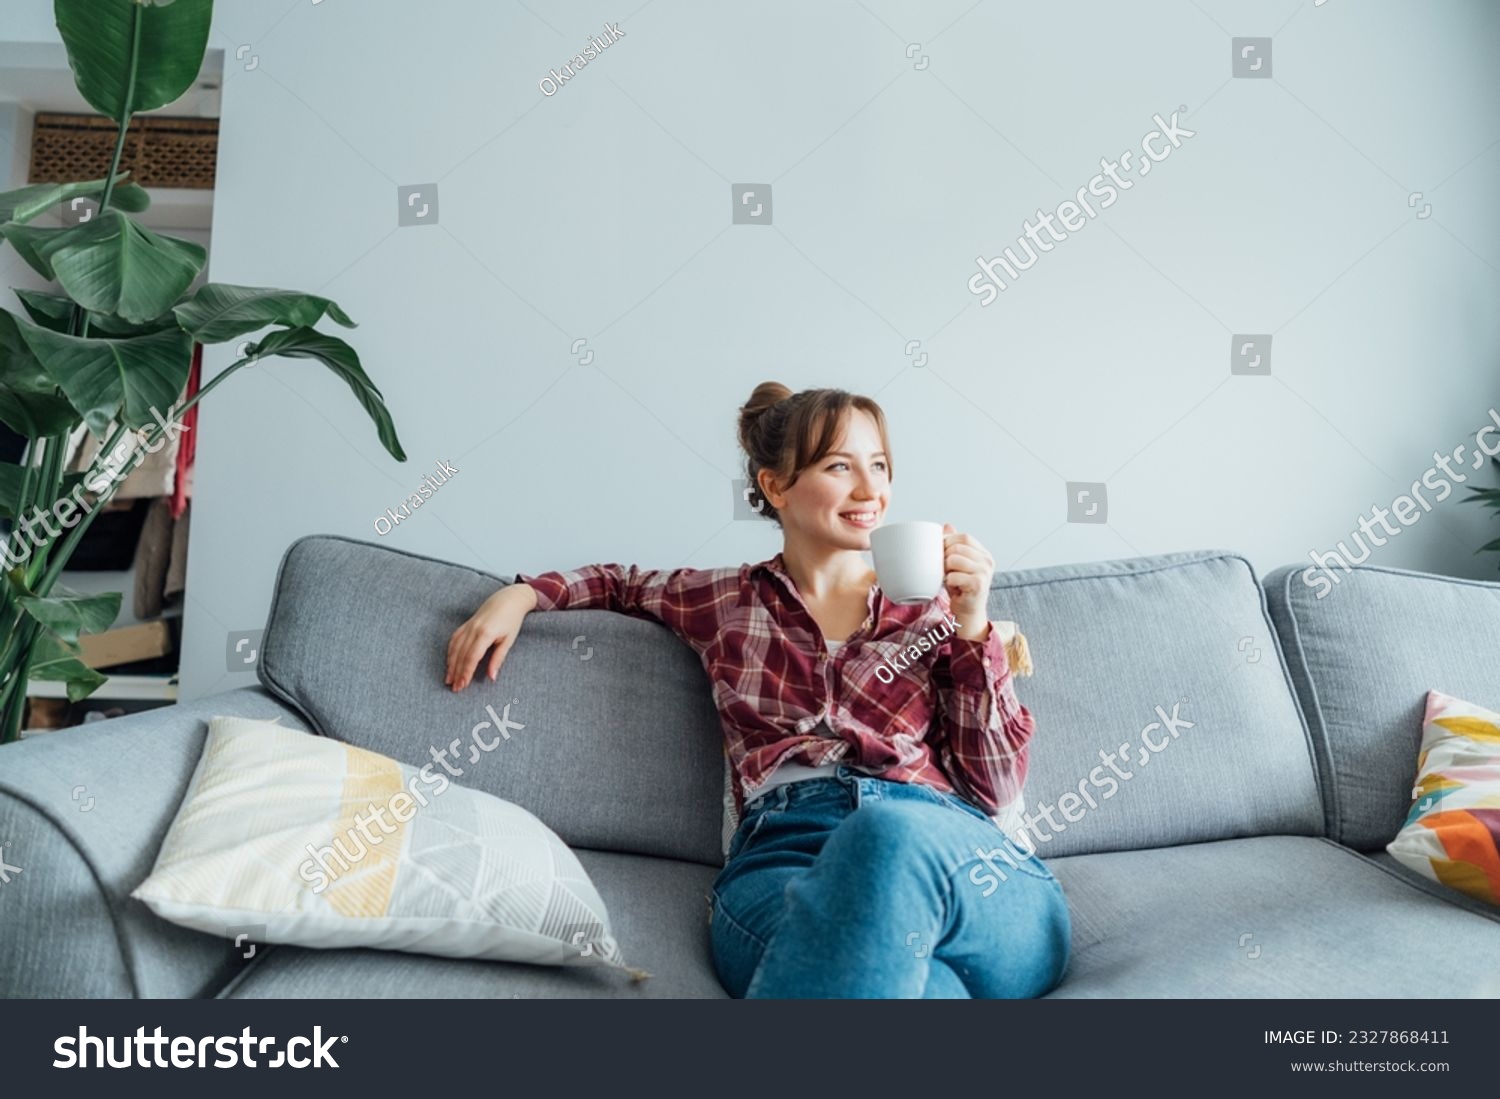 Young smiling woman sitting on sofa and looking away while drinking coffee or tea. Young brunette woman relaxing after housekeeping, home cleaning. Portrait of relaxed female resting at home. #2327868411